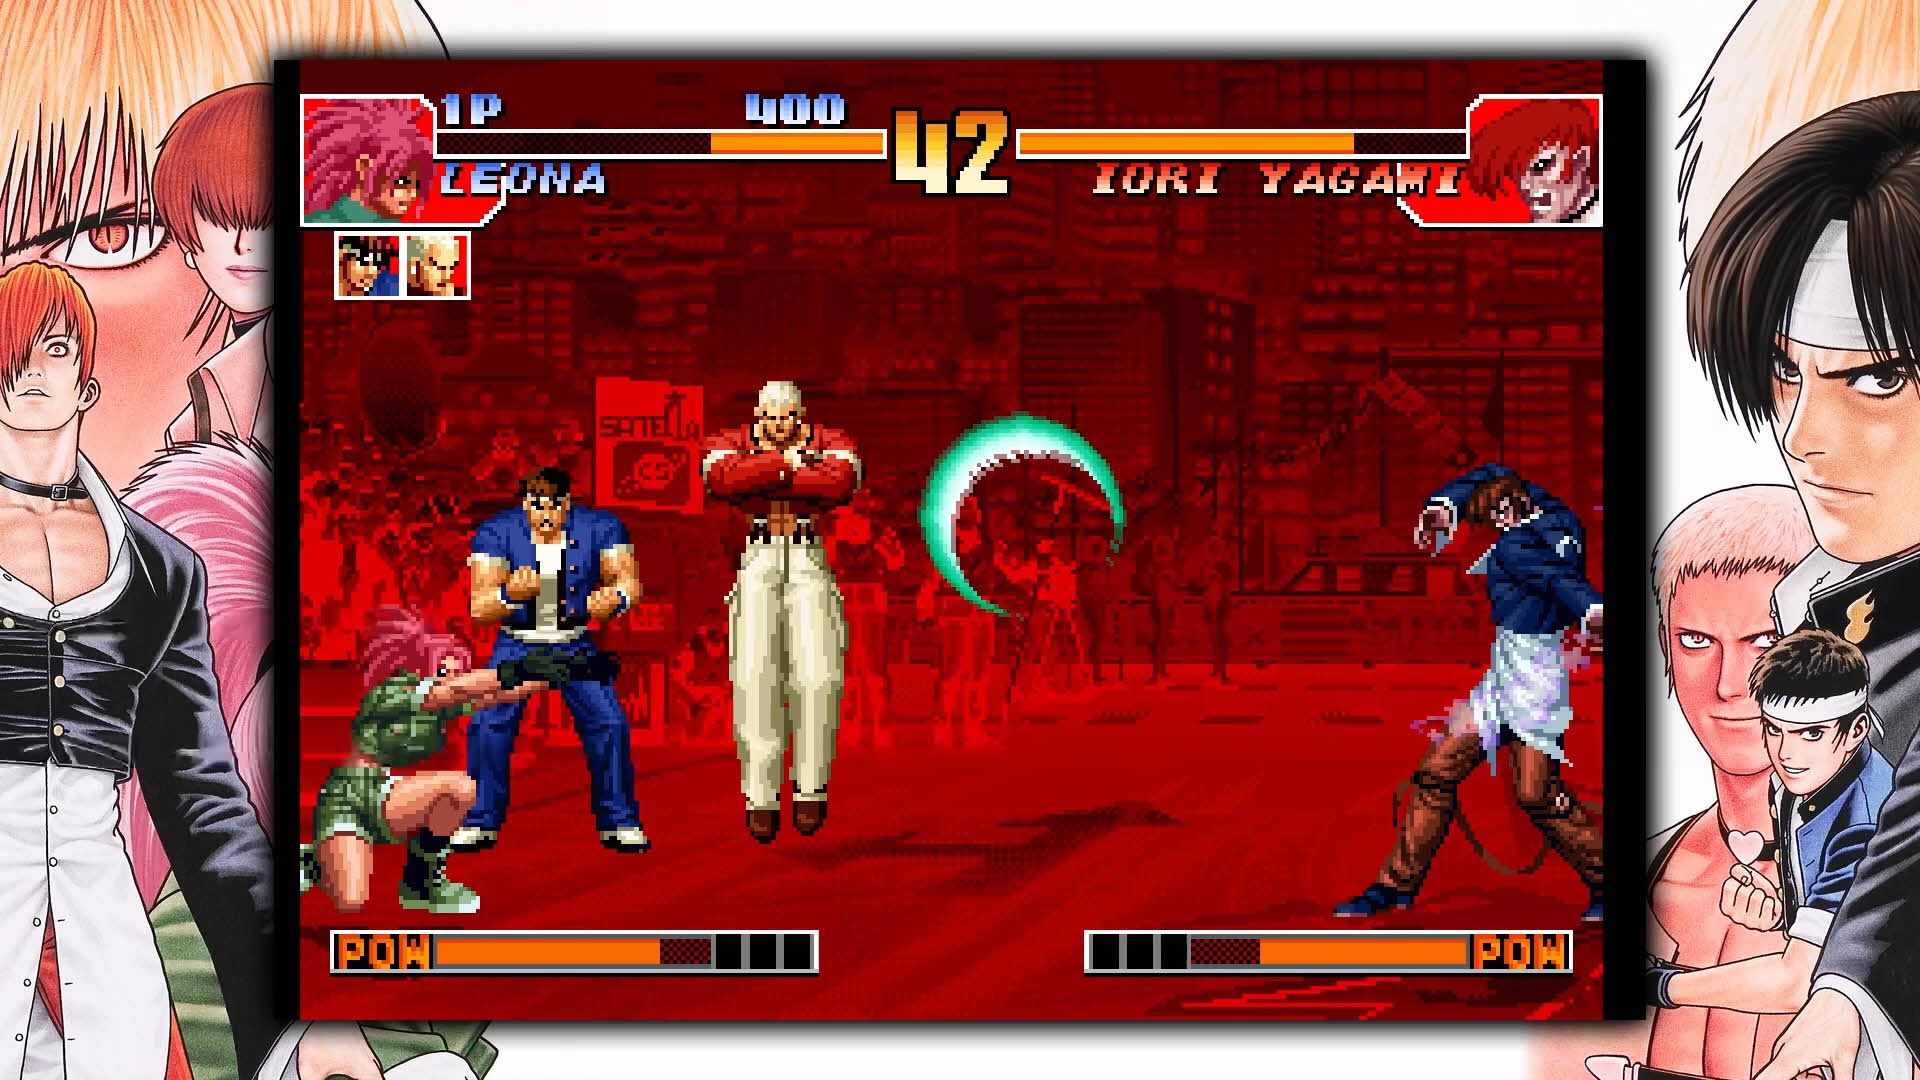 The King of Fighters '97: Global Match Videos for PlayStation Vita -  GameFAQs